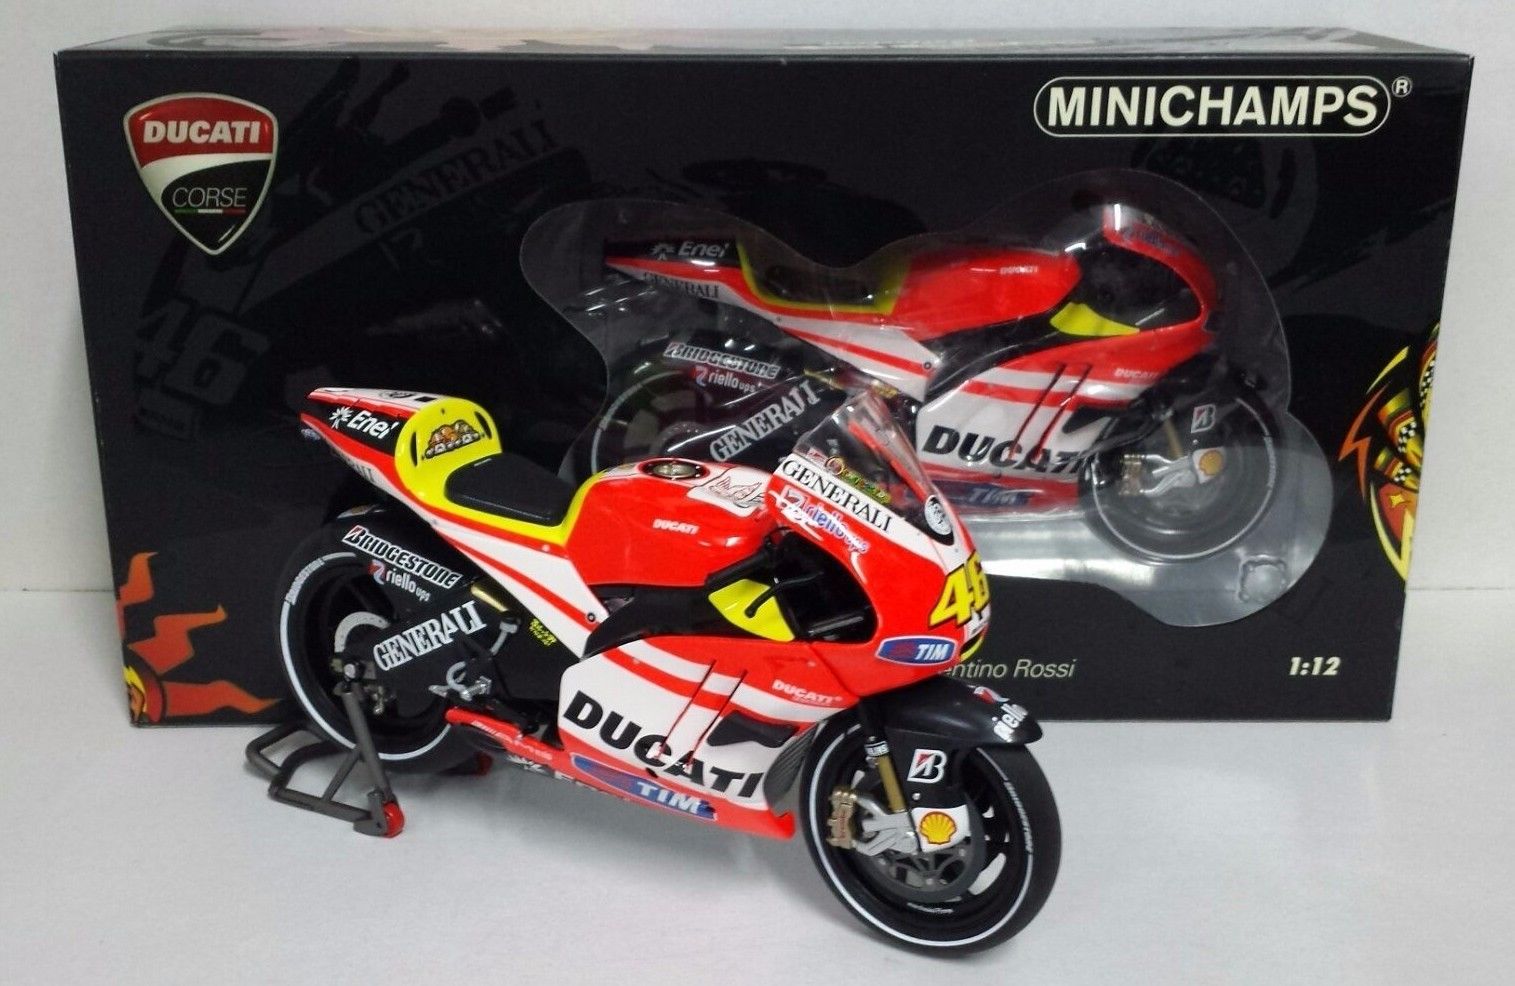 MINICHAMPS VALENTINO ROSSI 1/12 DUCATI UNVEILING TEST SEPANG 2011 SOFT TIRES CONVERSION